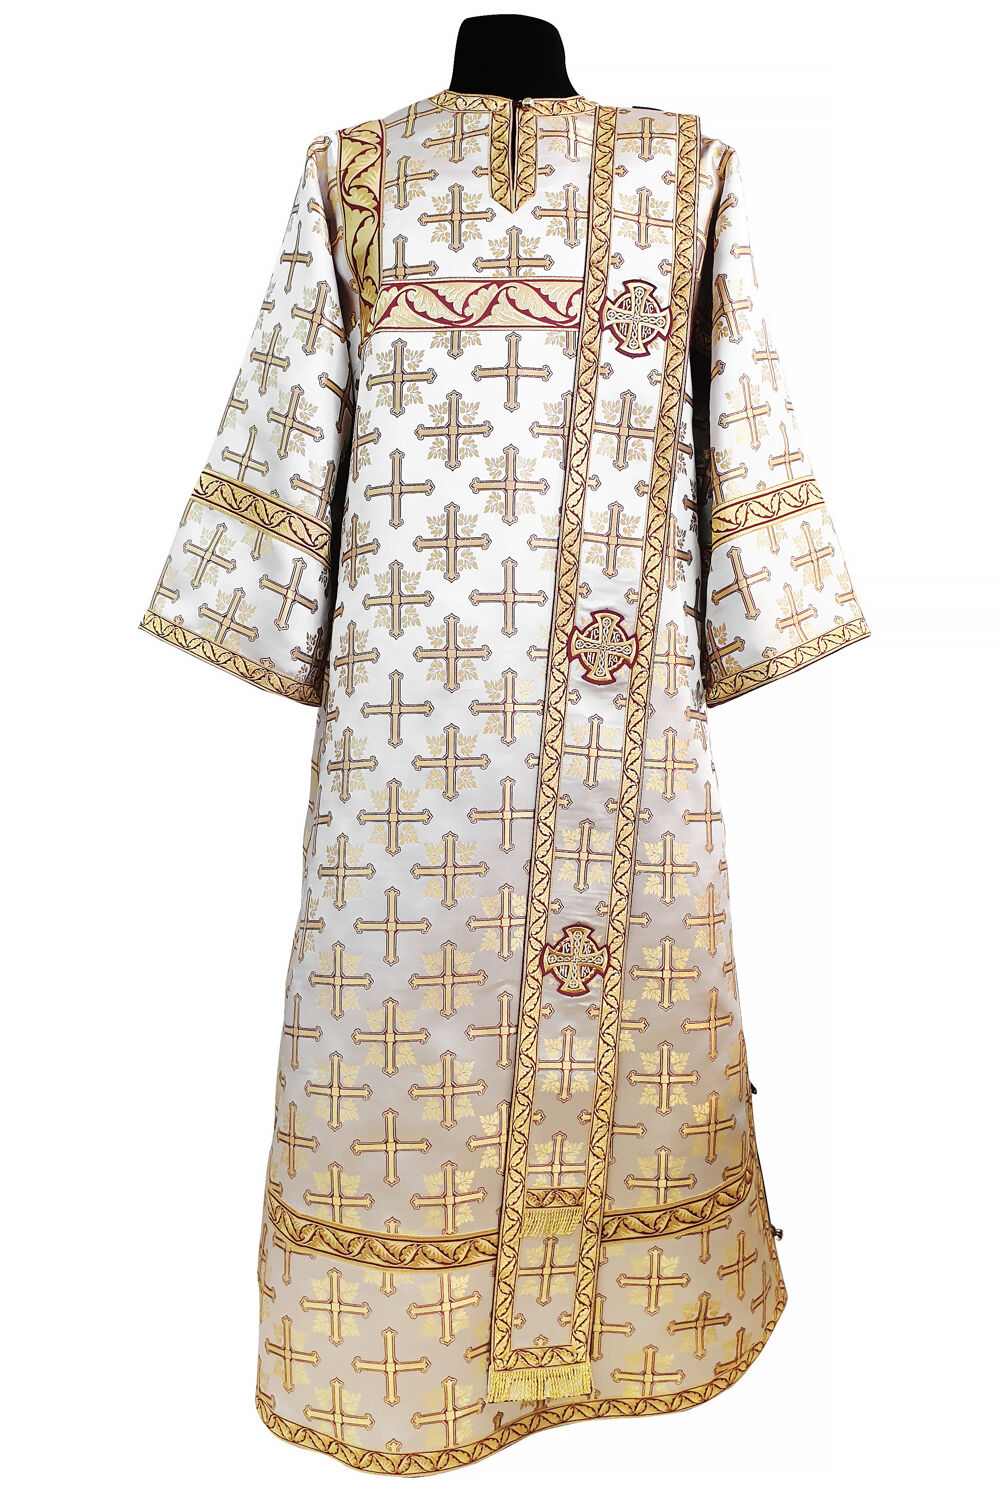 Deacon Vestment white with gold